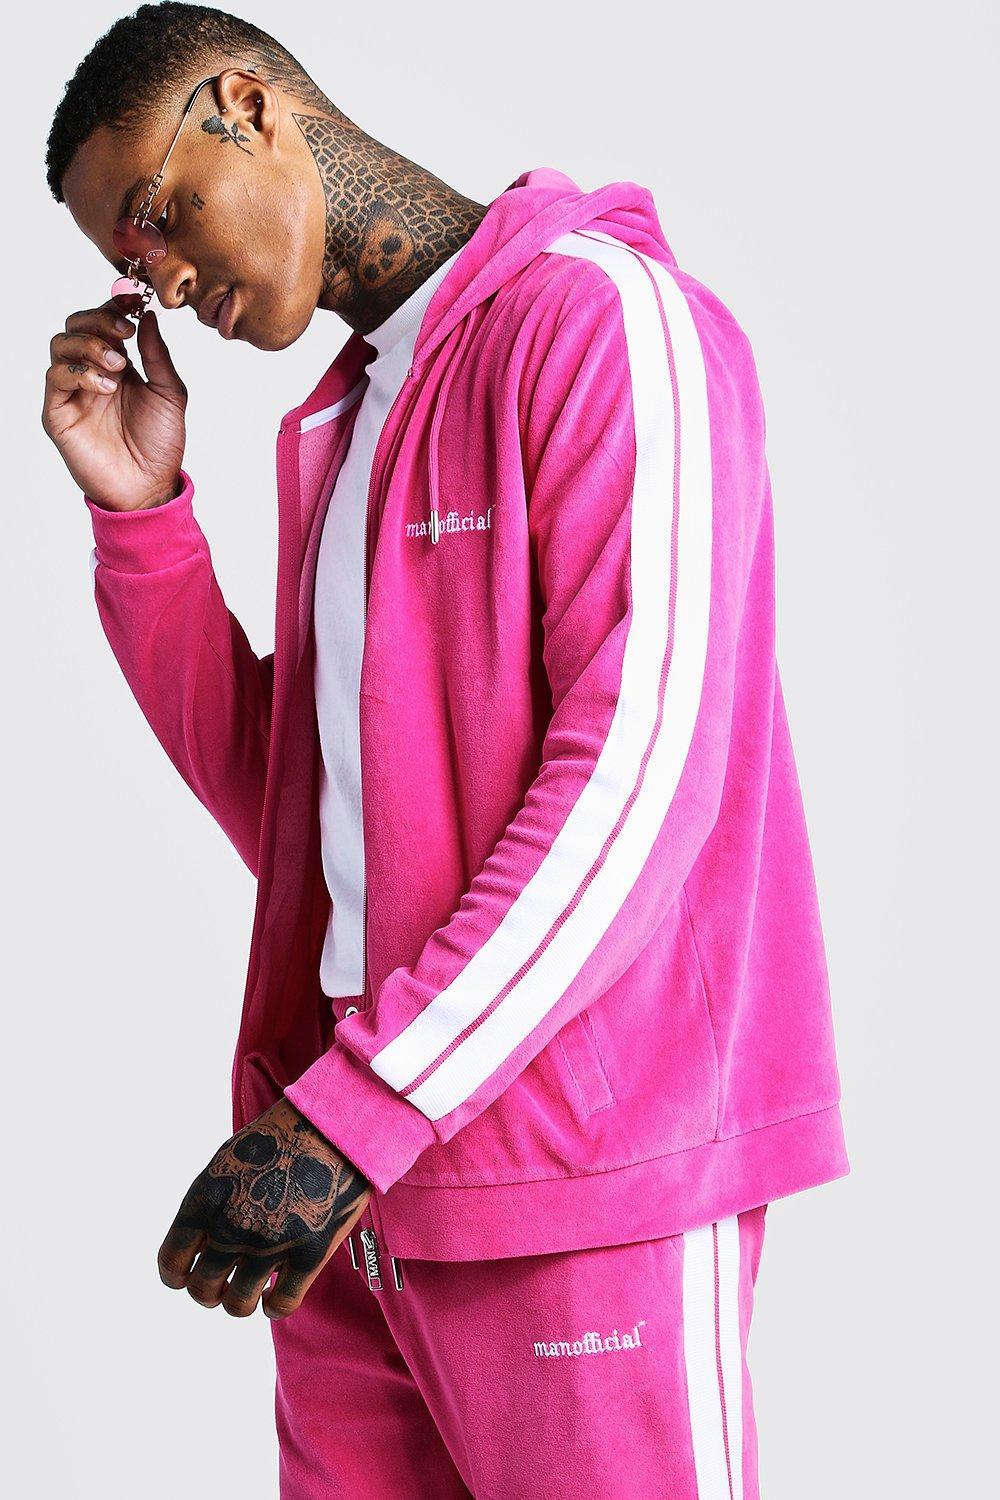 BoohooMAN Man Official Velour Tracksuit With Side Tape in Pink for Men